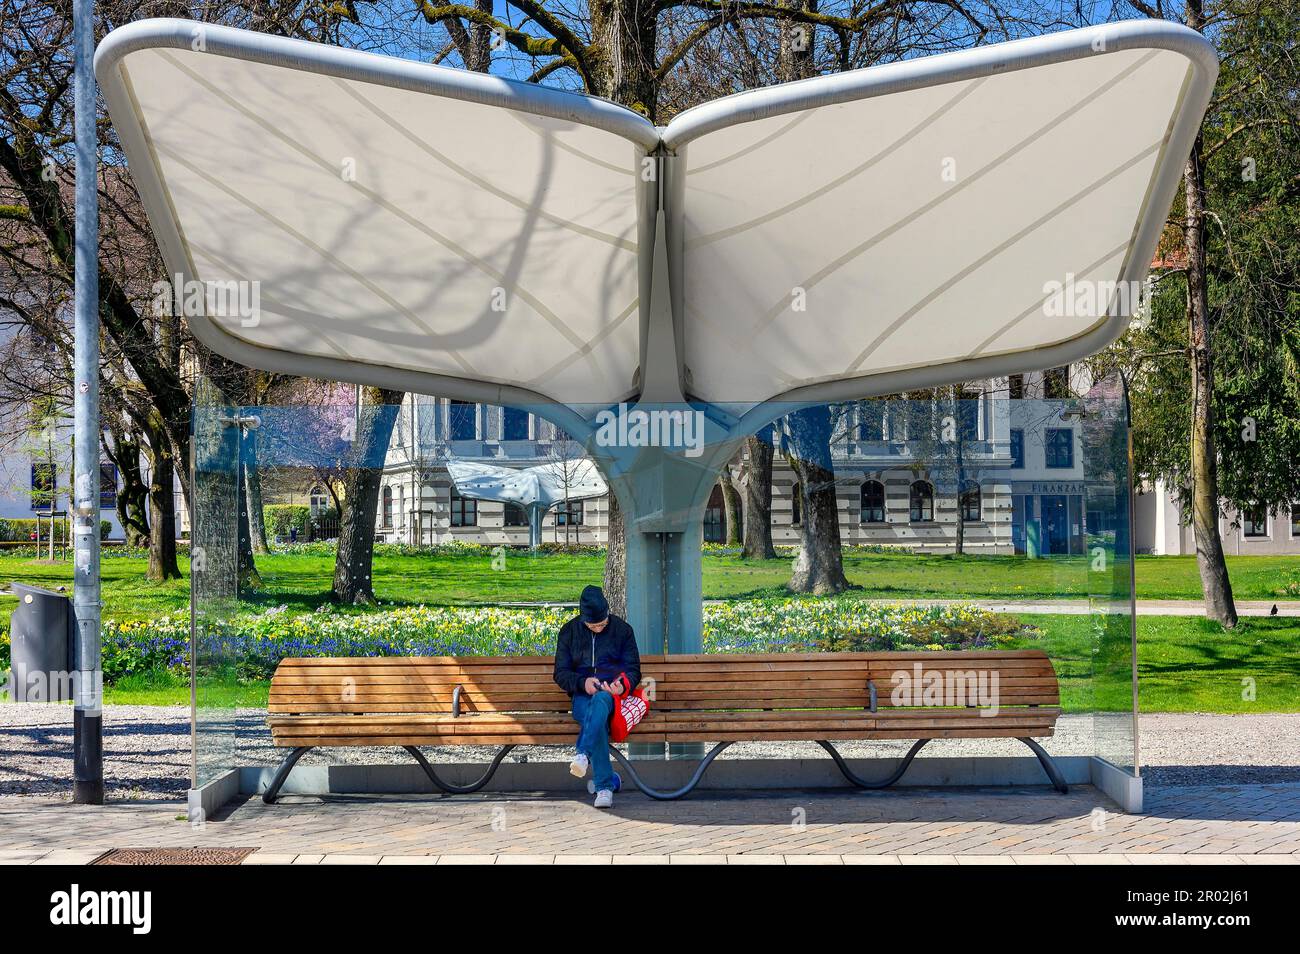 Rain and sun protection over park bench and man with knitted cap, Kempten, Allgaeu, Bavaria, Germany Stock Photo